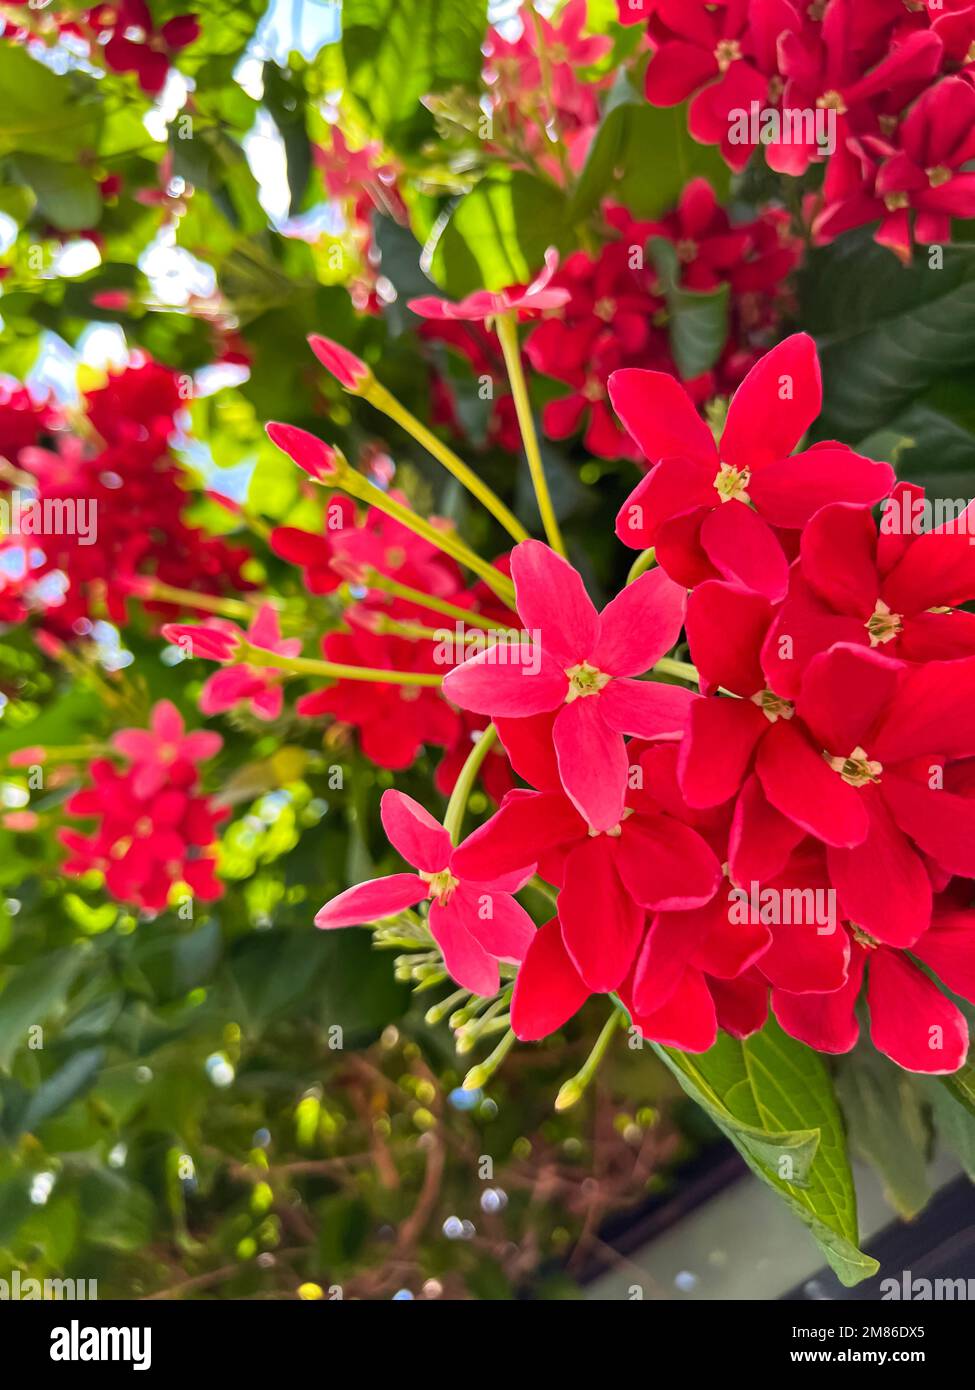 Bright red flowers blooming outdoors, closeup Stock Photo